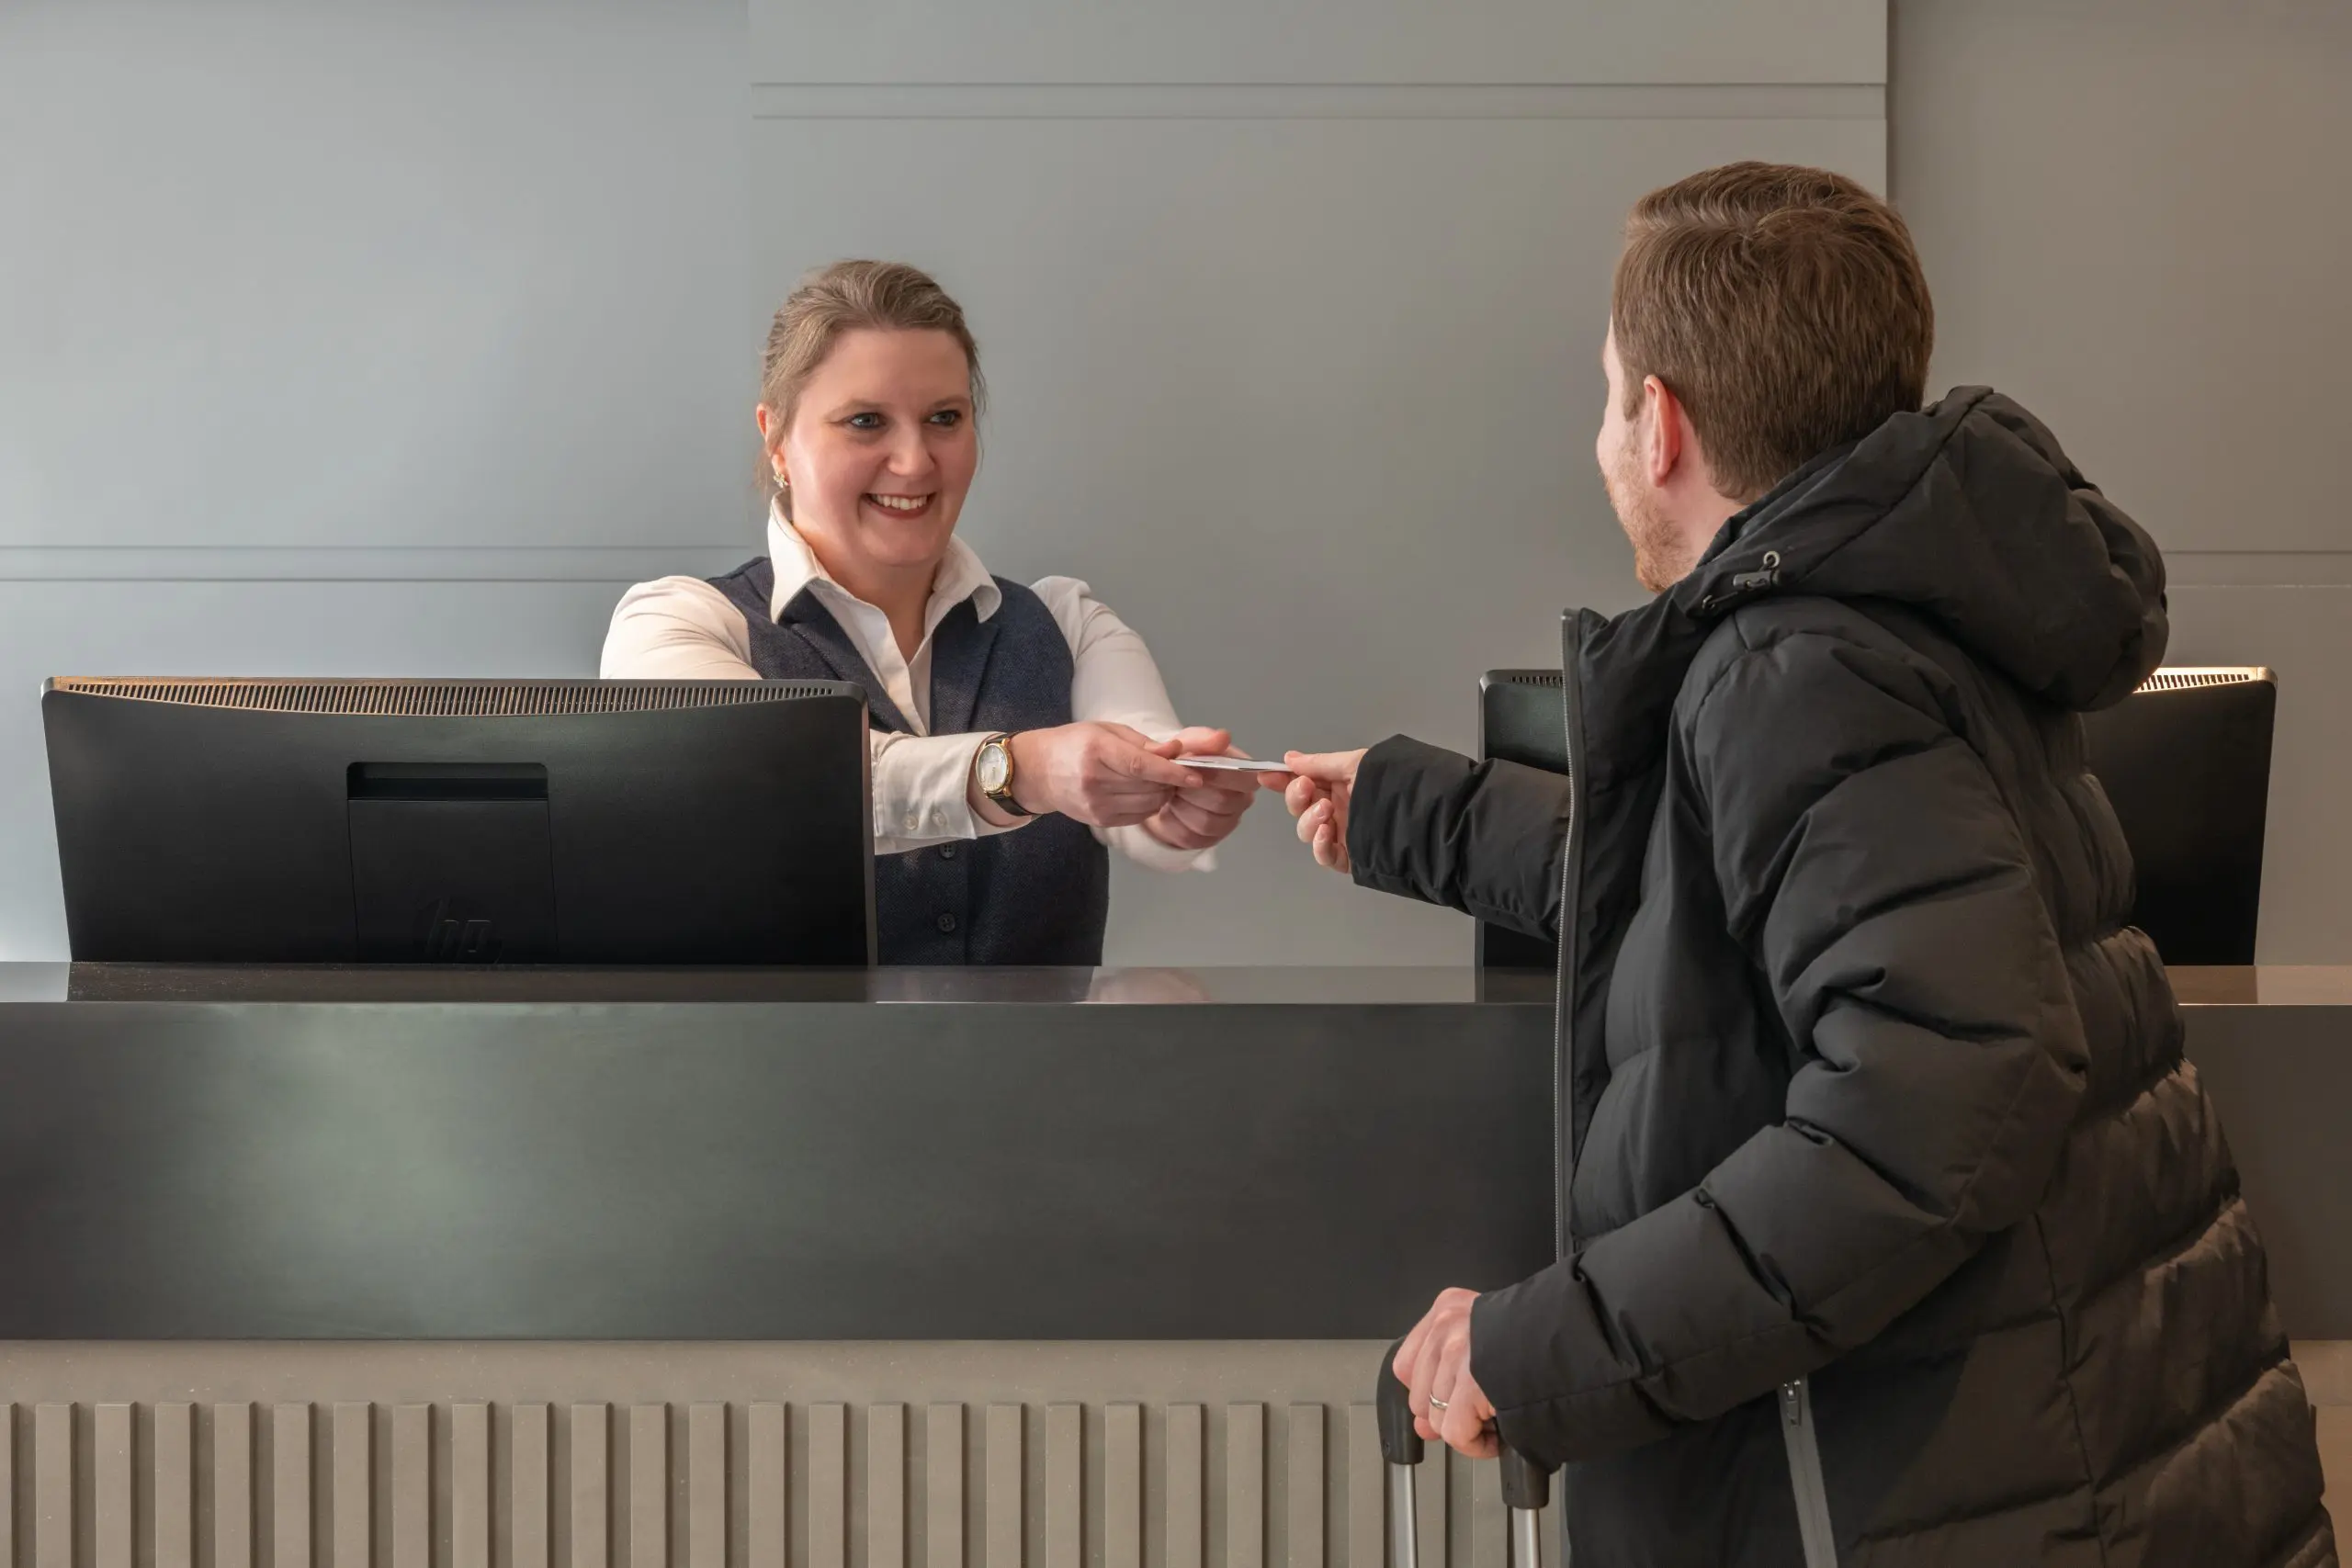 A customer receiving a key card at The Resident reception.